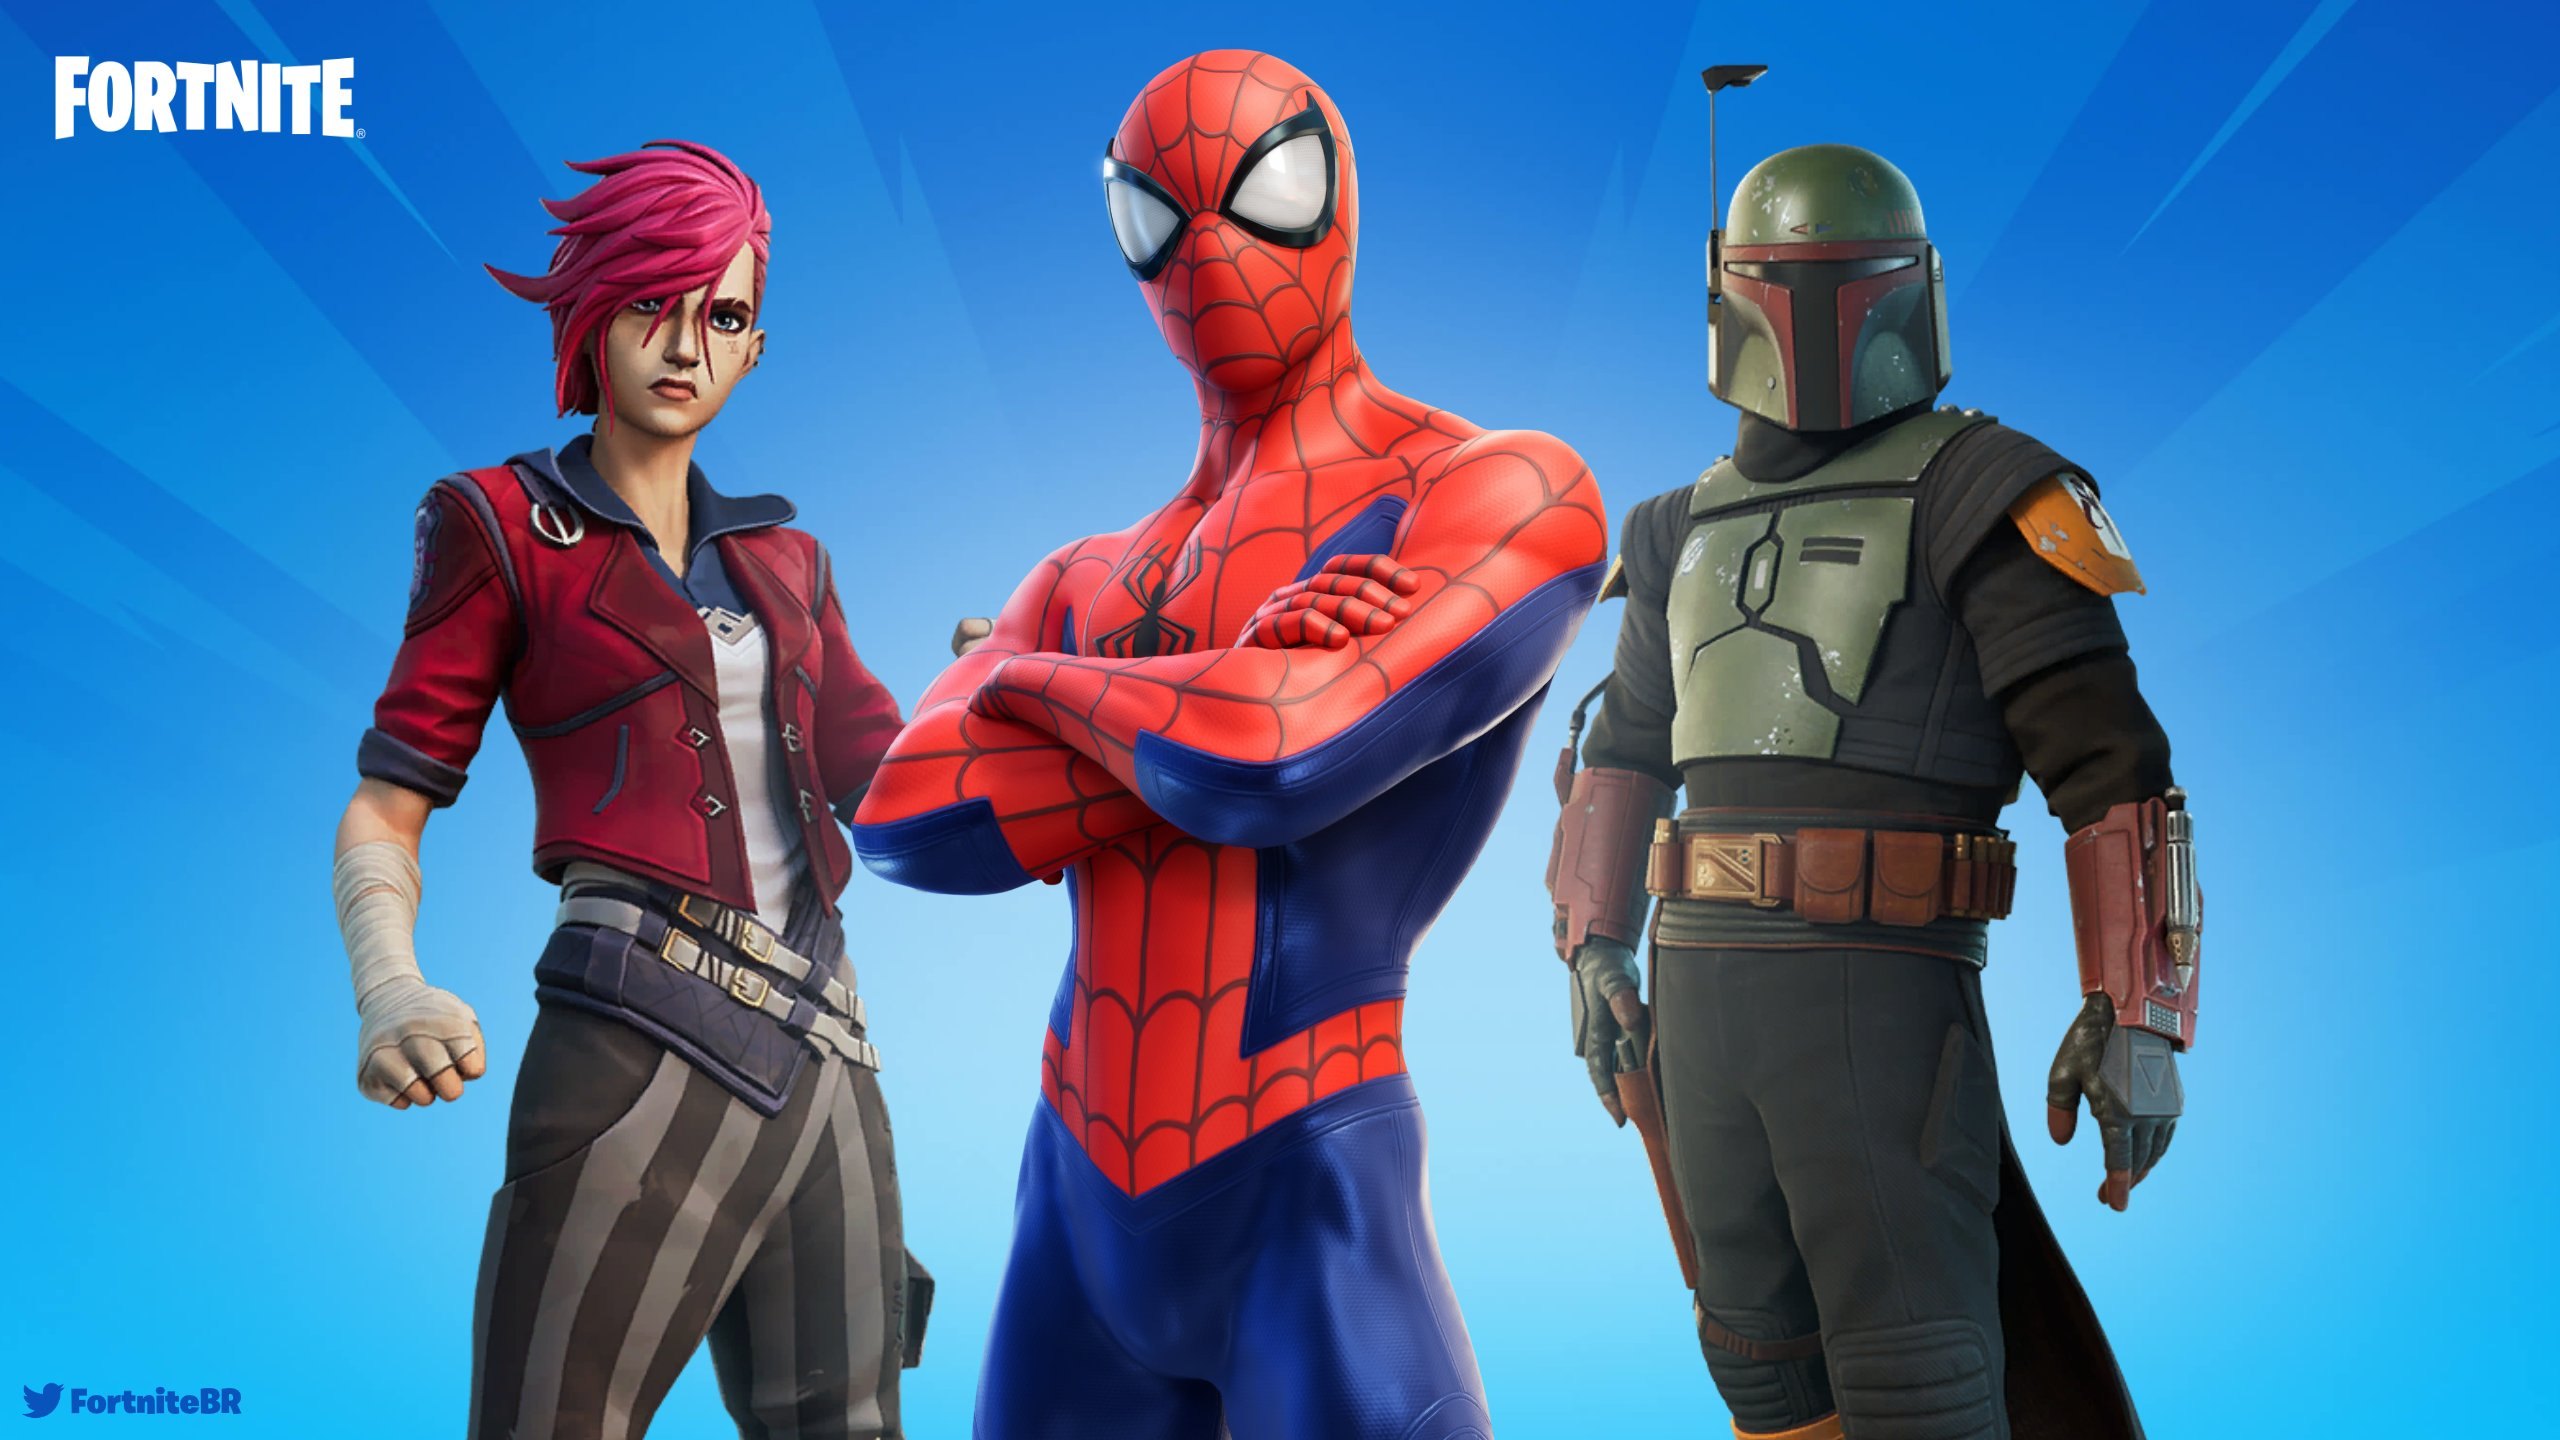 Crossovers now make up more than 50% of all new Fortnite cosmetics